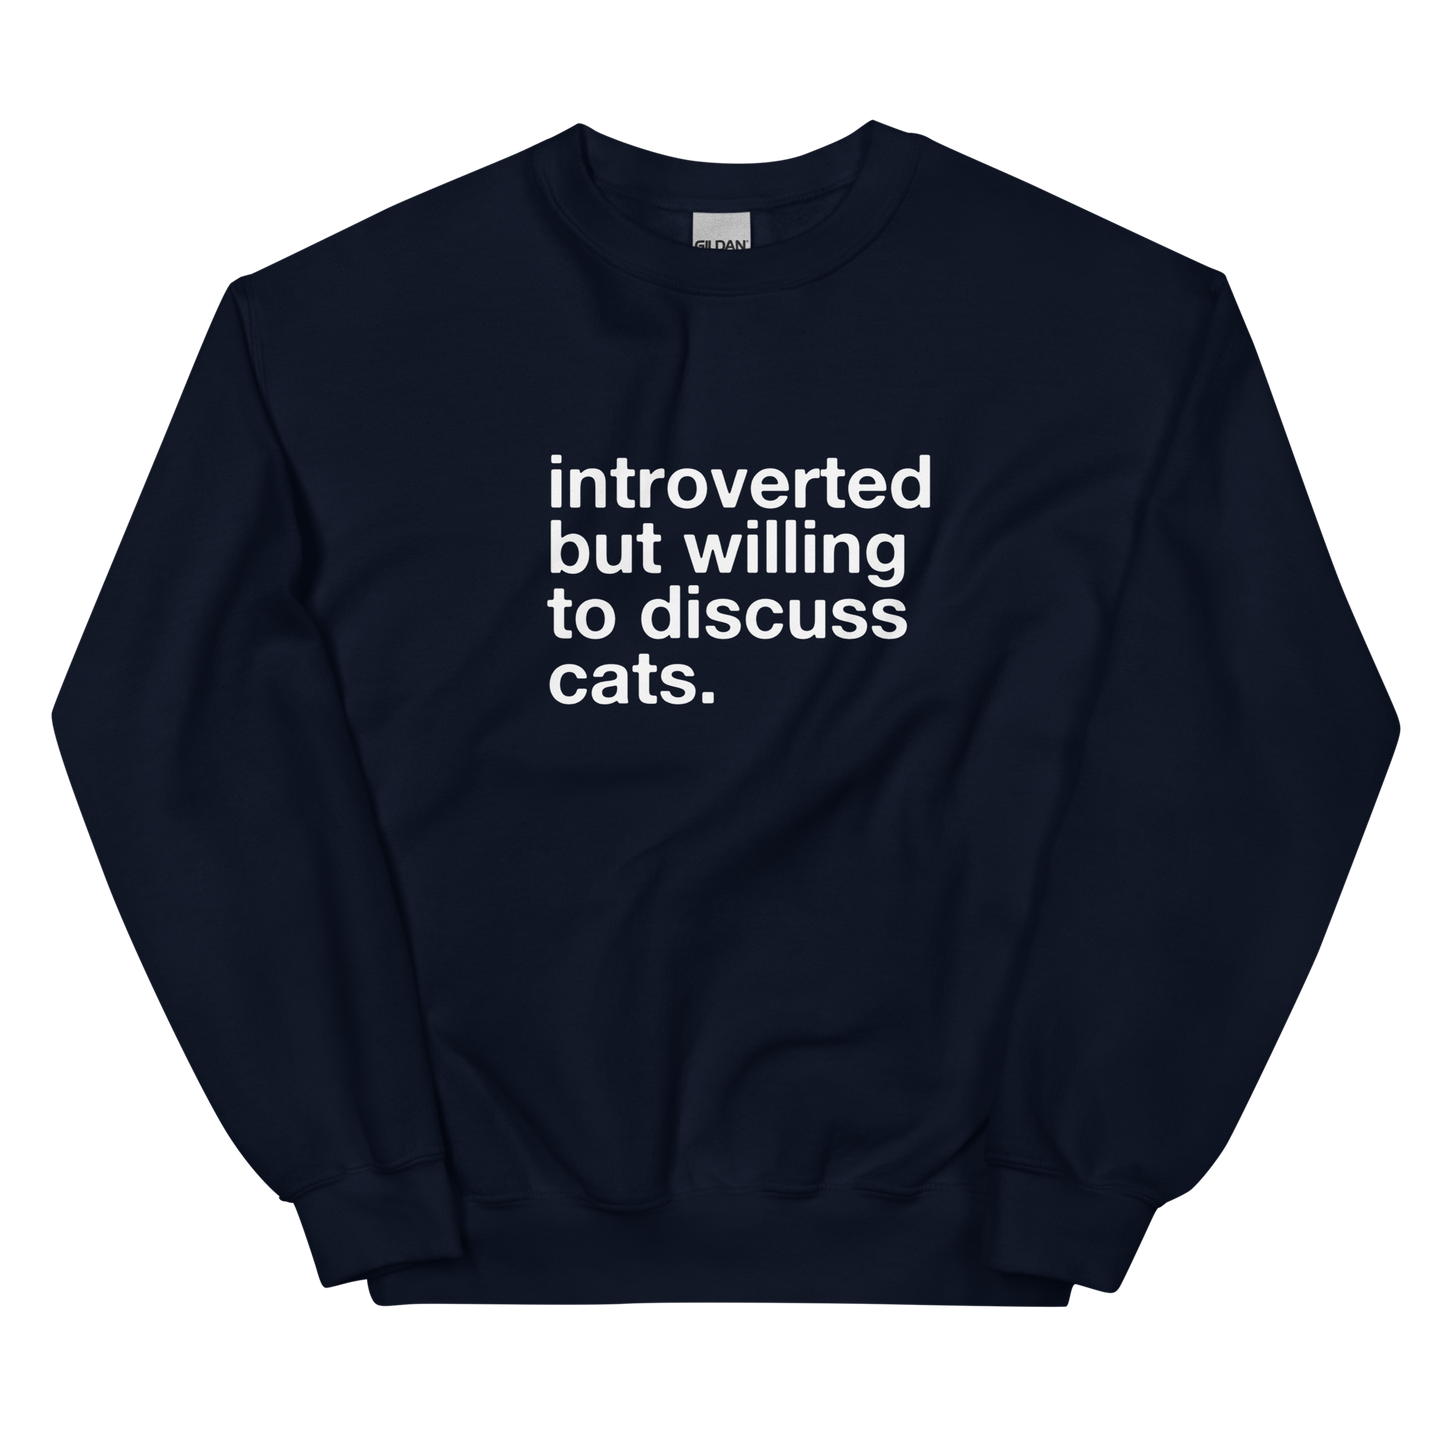 introverted but willing to discuss cats. - Unisex Crewneck Sweatshirt